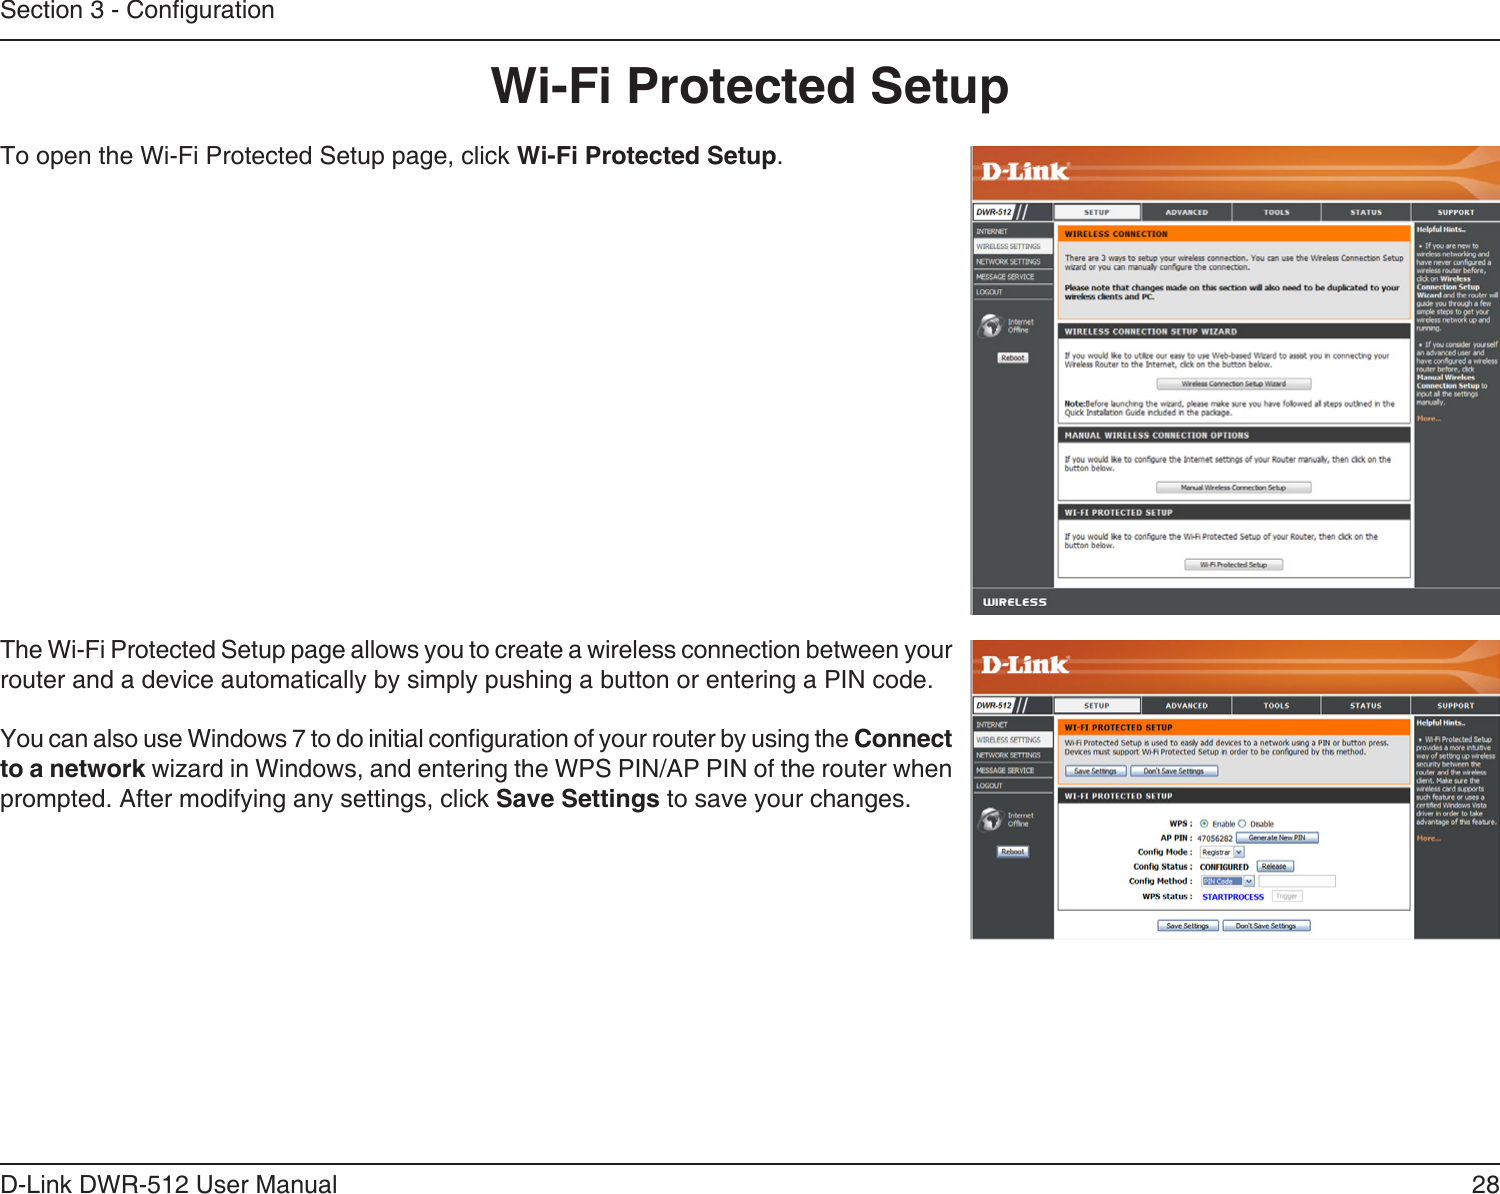 28D-Link DWR-512 User ManualSection 3 - CongurationWi-Fi Protected SetupTo open the Wi-Fi Protected Setup page, click Wi-Fi Protected Setup.The Wi-Fi Protected Setup page allows you to create a wireless connection between your router and a device automatically by simply pushing a button or entering a PIN code. You can also use Windows 7 to do initial conguration of your router by using the Connect to a network wizard in Windows, and entering the WPS PIN/AP PIN of the router when prompted. After modifying any settings, click Save Settings to save your changes.